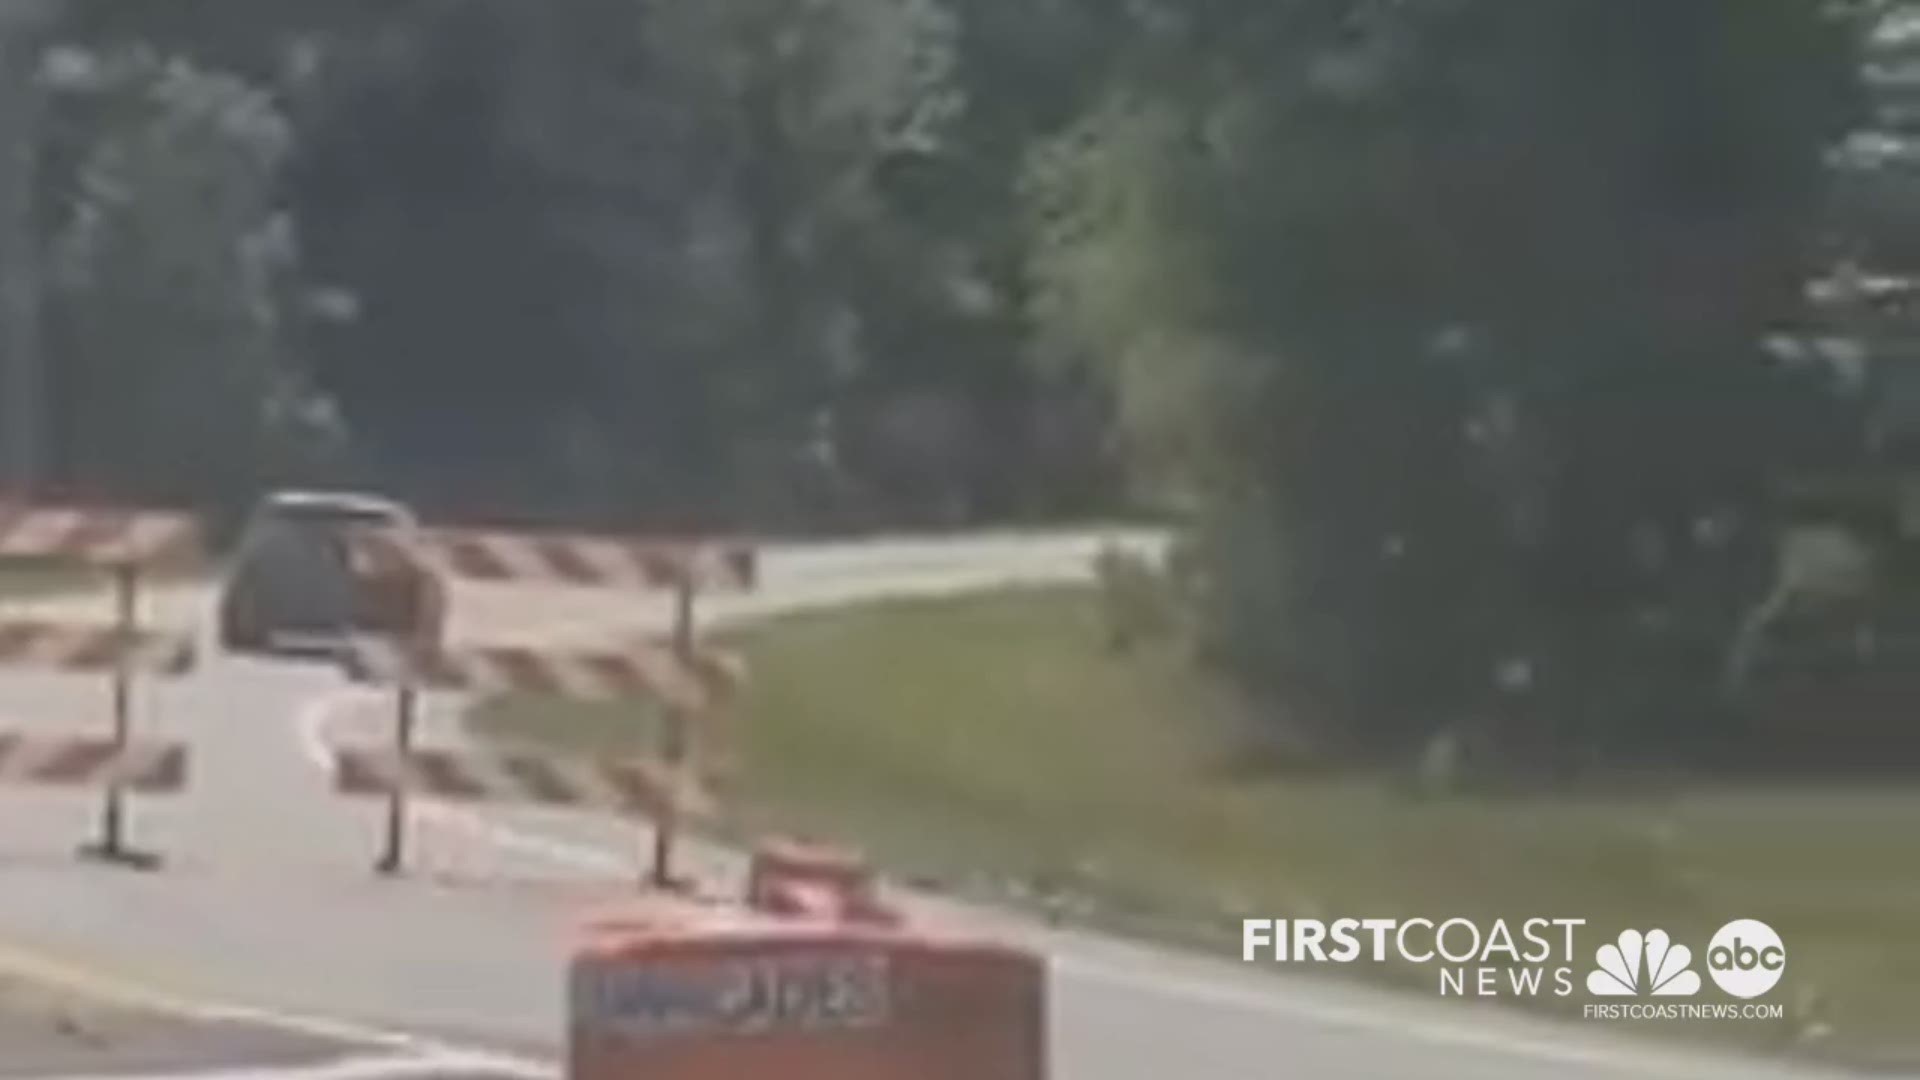 Video shared with First Coast News on Sunday showing motorist on I-95 driving south driving around barriers avoiding checkpoints for people entering the state.